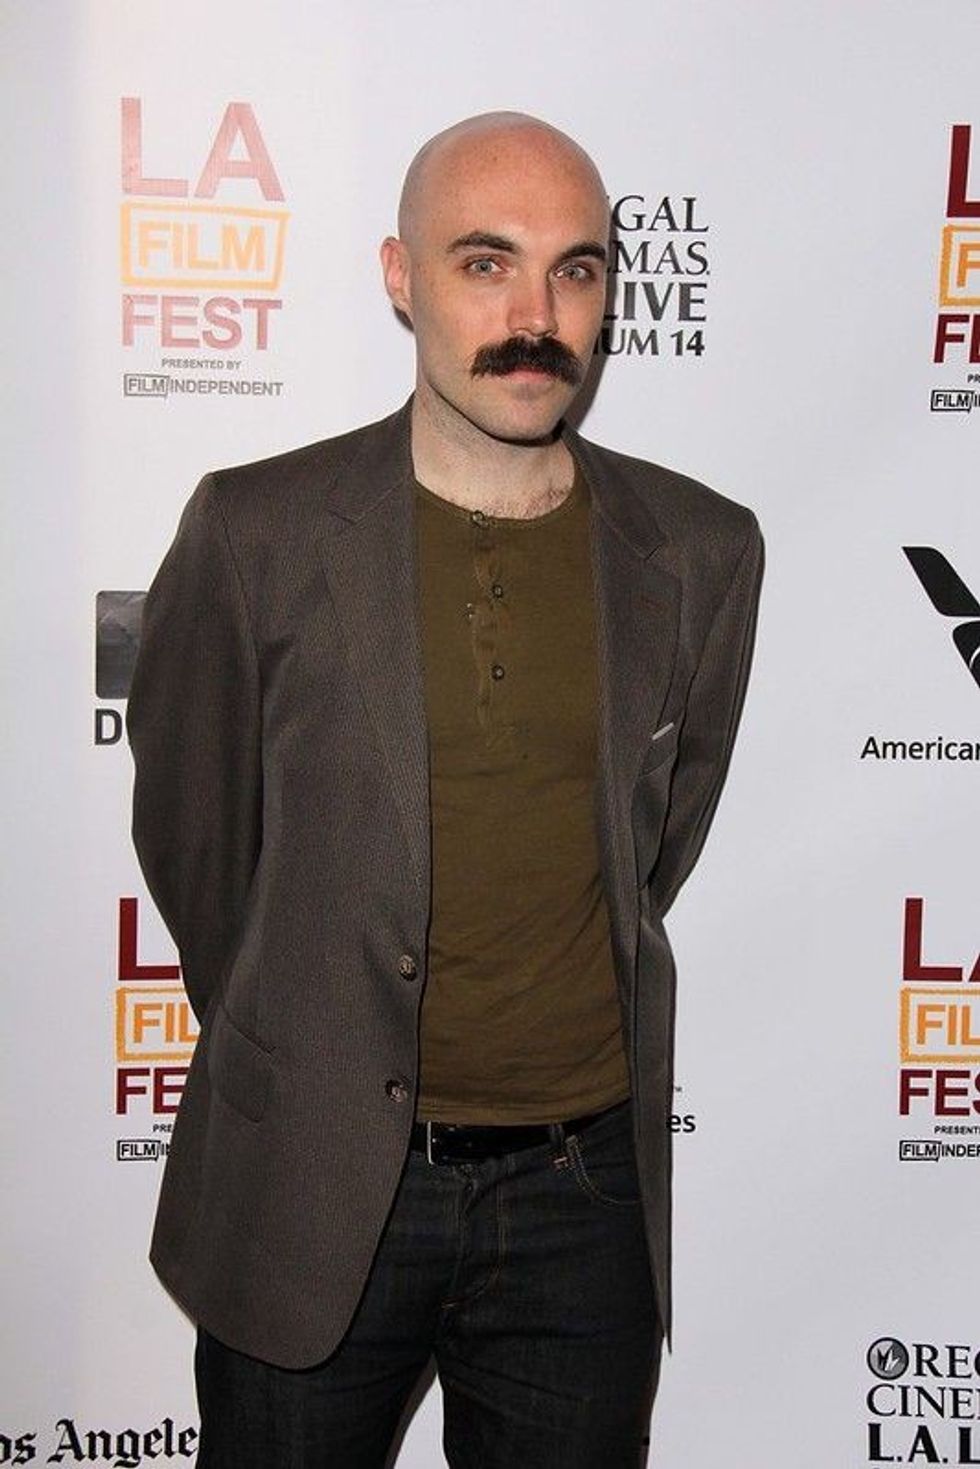 David Lowery facts you never knew!